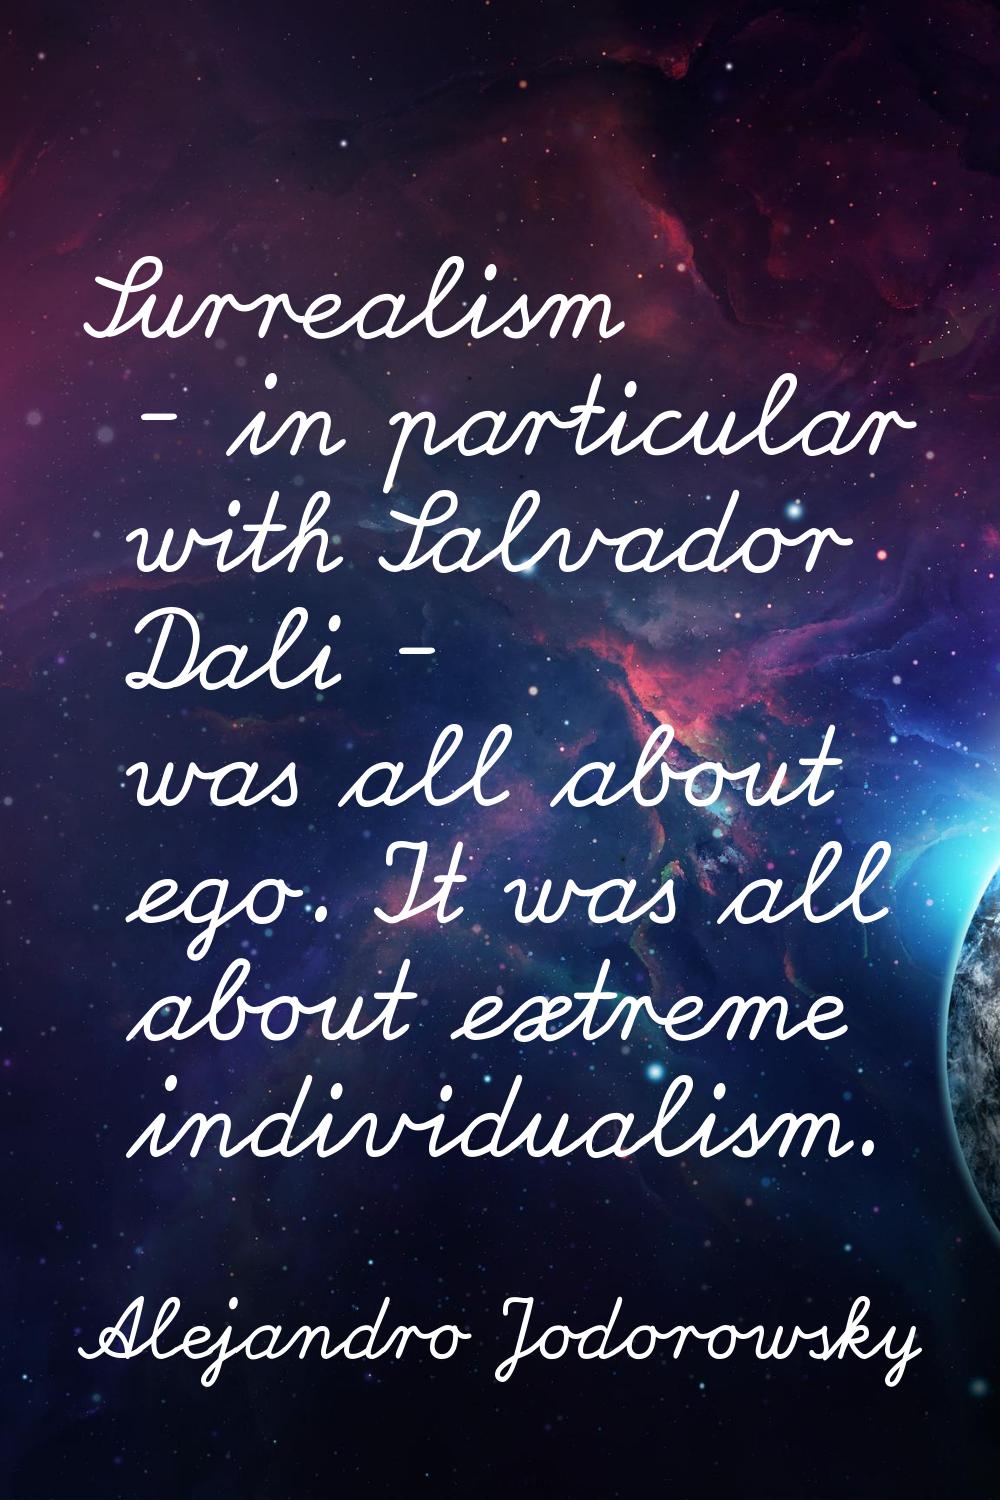 Surrealism - in particular with Salvador Dali - was all about ego. It was all about extreme individ